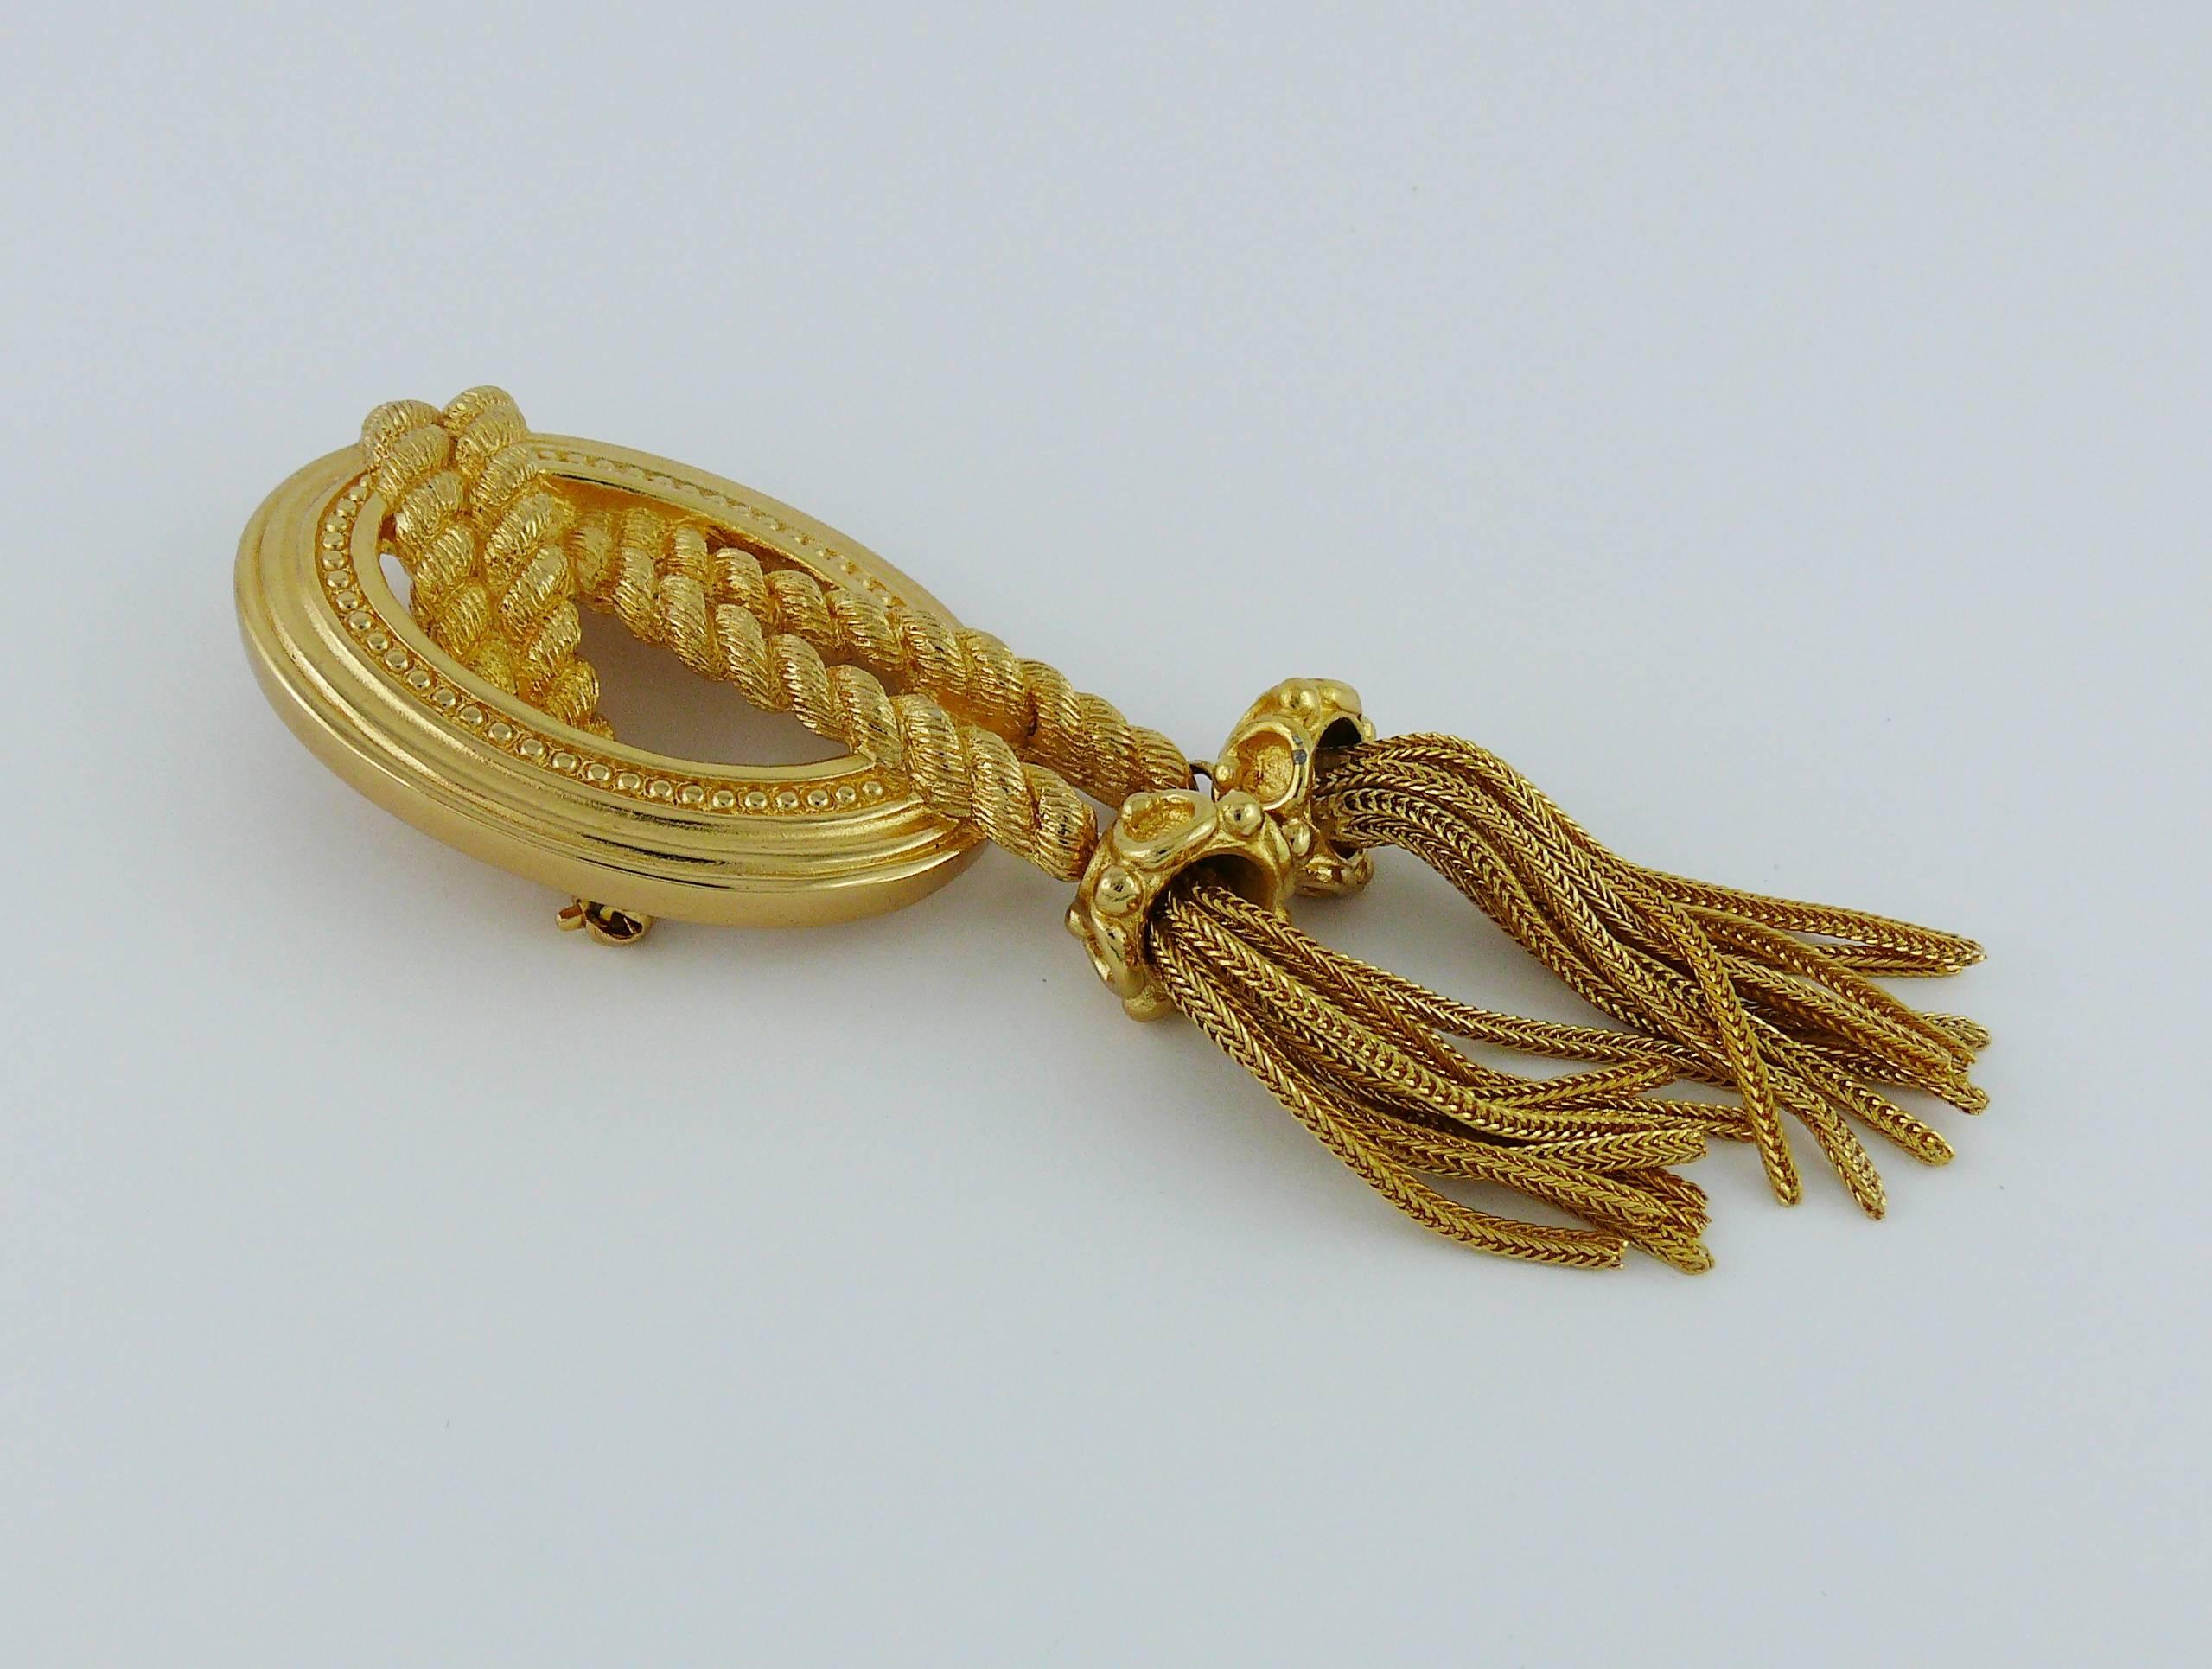 CHRISTIAN DIOR vintage gold tone booch featuring the iconic medallion of the House with tassels and intertwined rope.

Marked CHR. DIOR.

Indicative measurements : length approx. 9.5 cm (3.74 inches) / width approx. 3.2 cm (1.26 inches).

JEWELRY